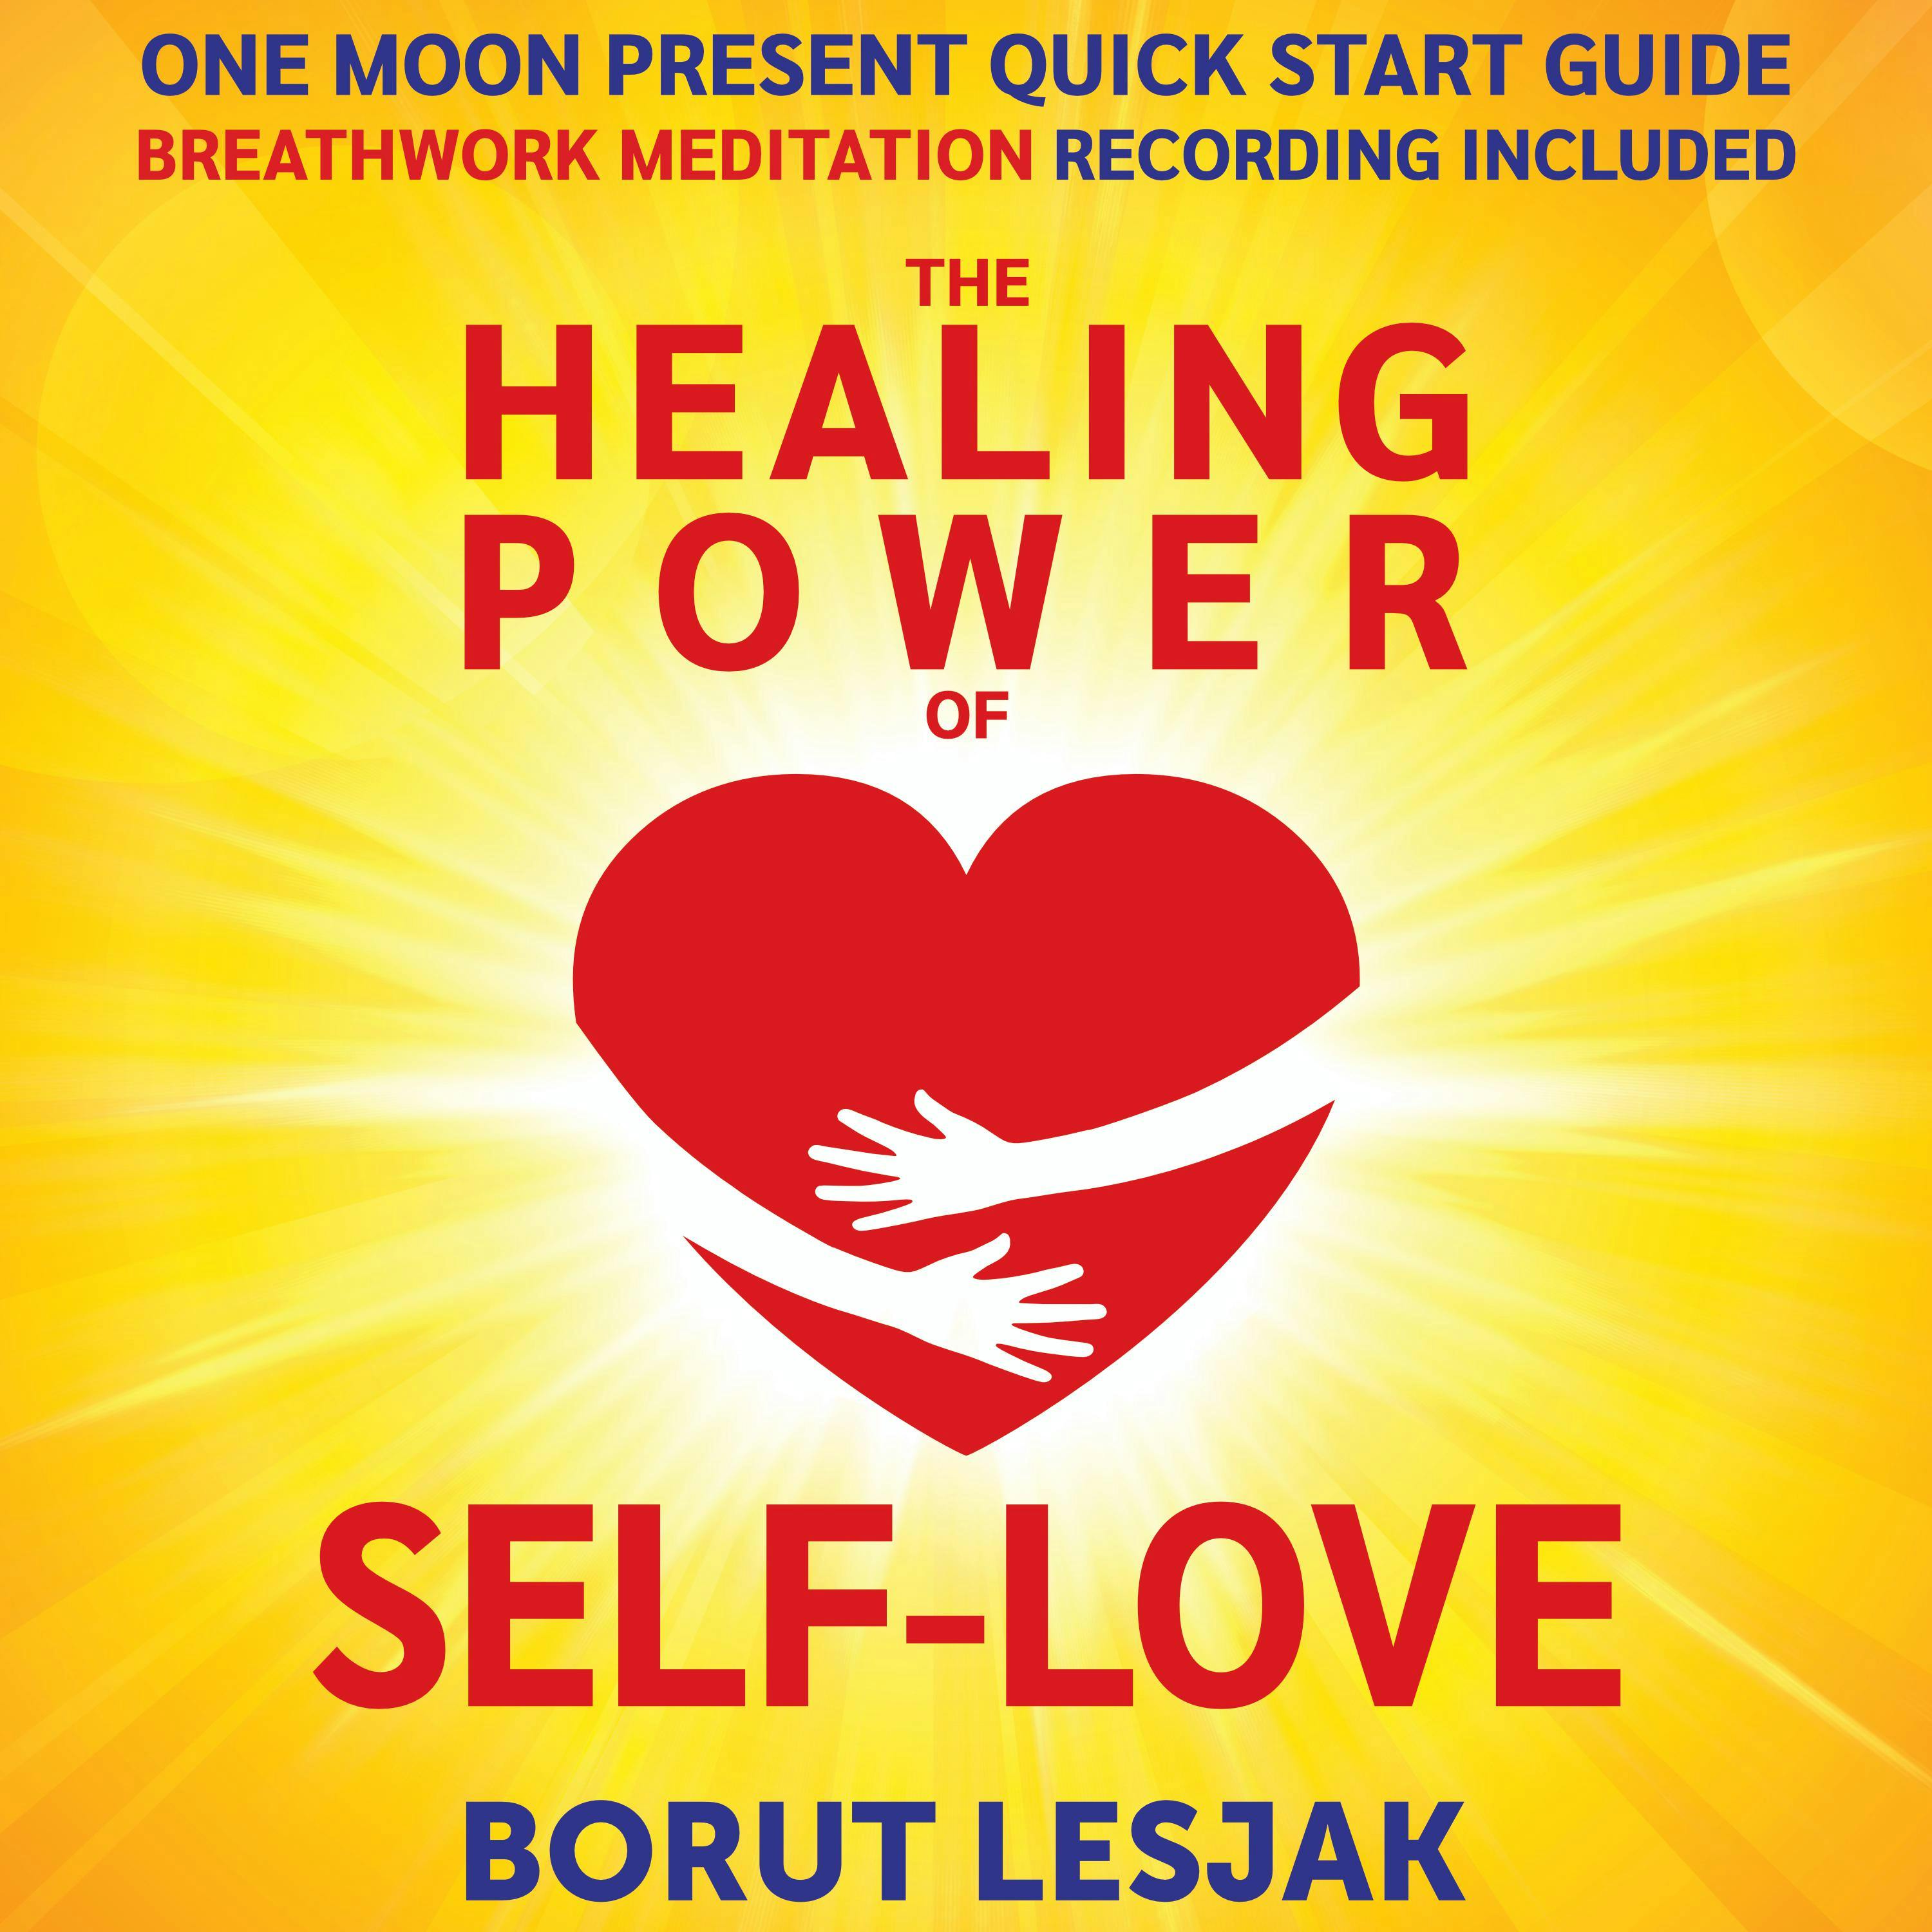 One Moon Present Quick Start Guide: A Radical Healing Formula to Transform Your Life in 28 Days: The Healing Power of Self-Love - Borut Lesjak